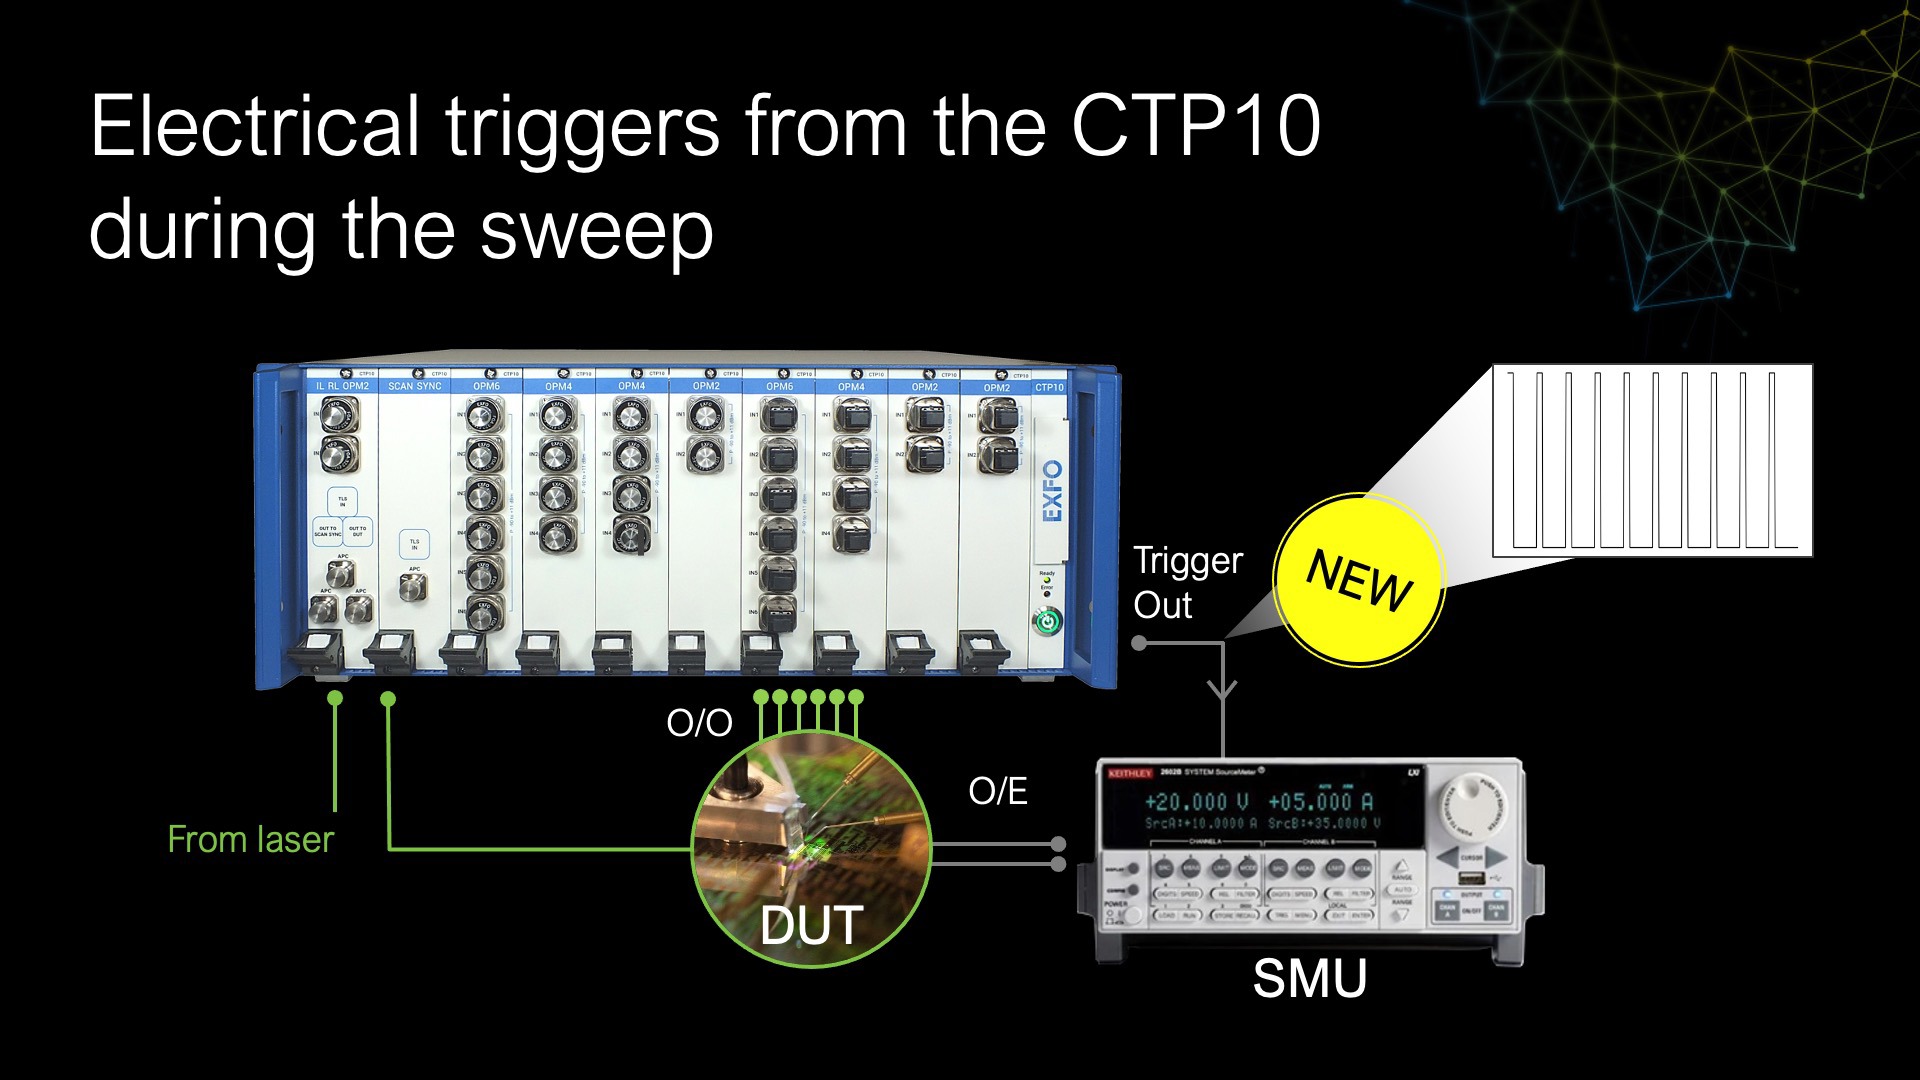 Electrical triggers from the CTP10 during the sweep